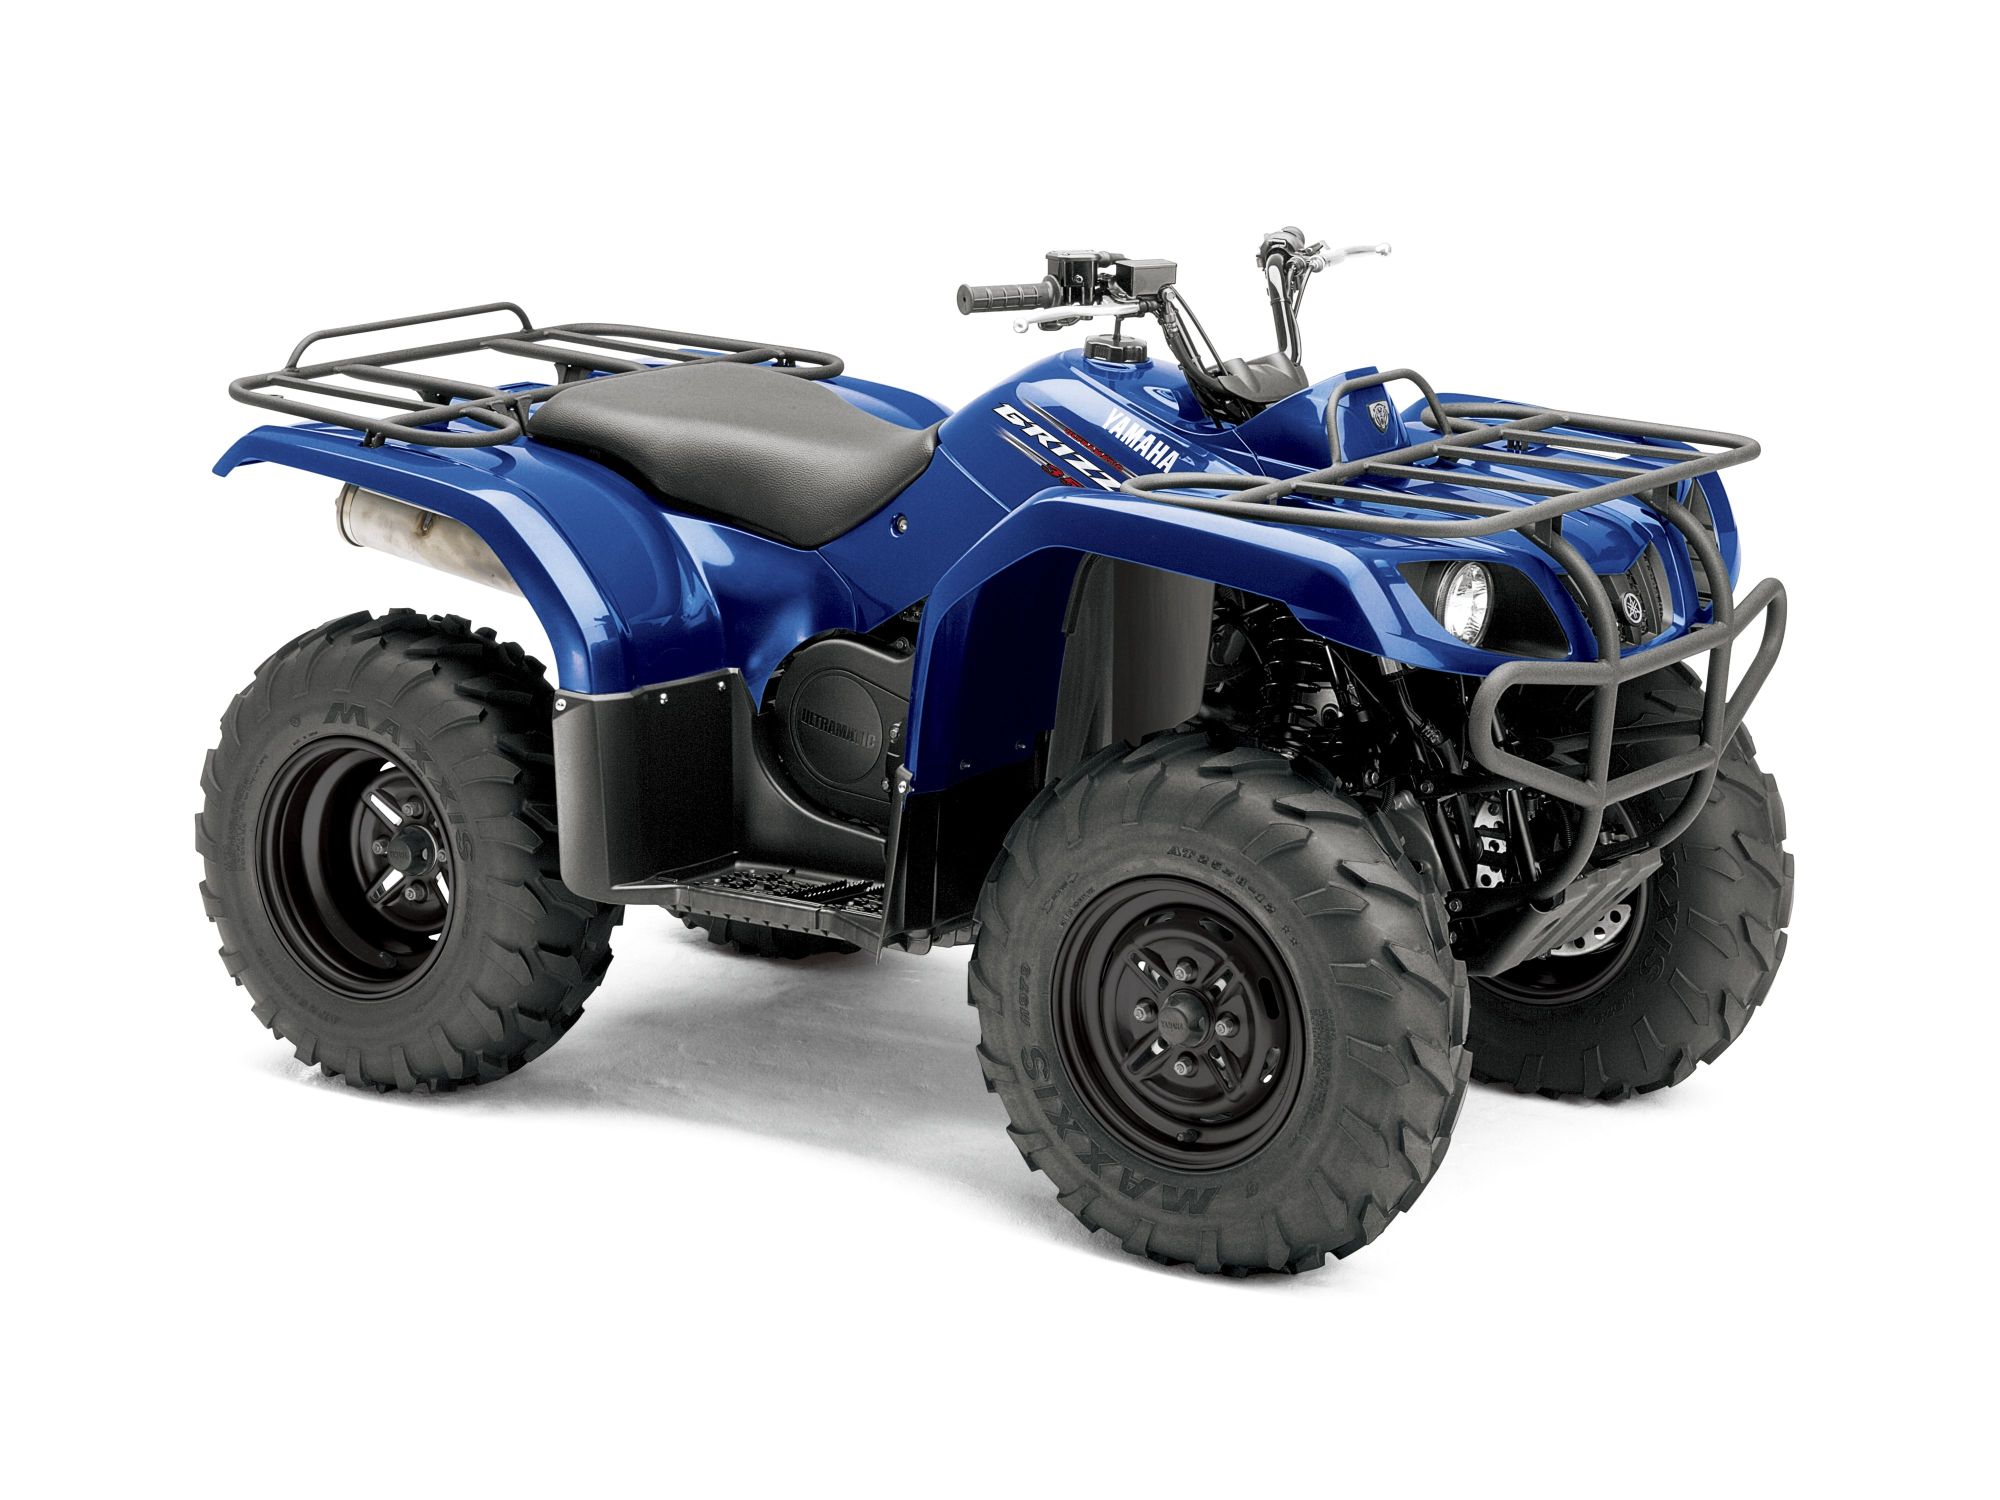 Yamaha Grizzly 350 4WD 2017 photo - 2